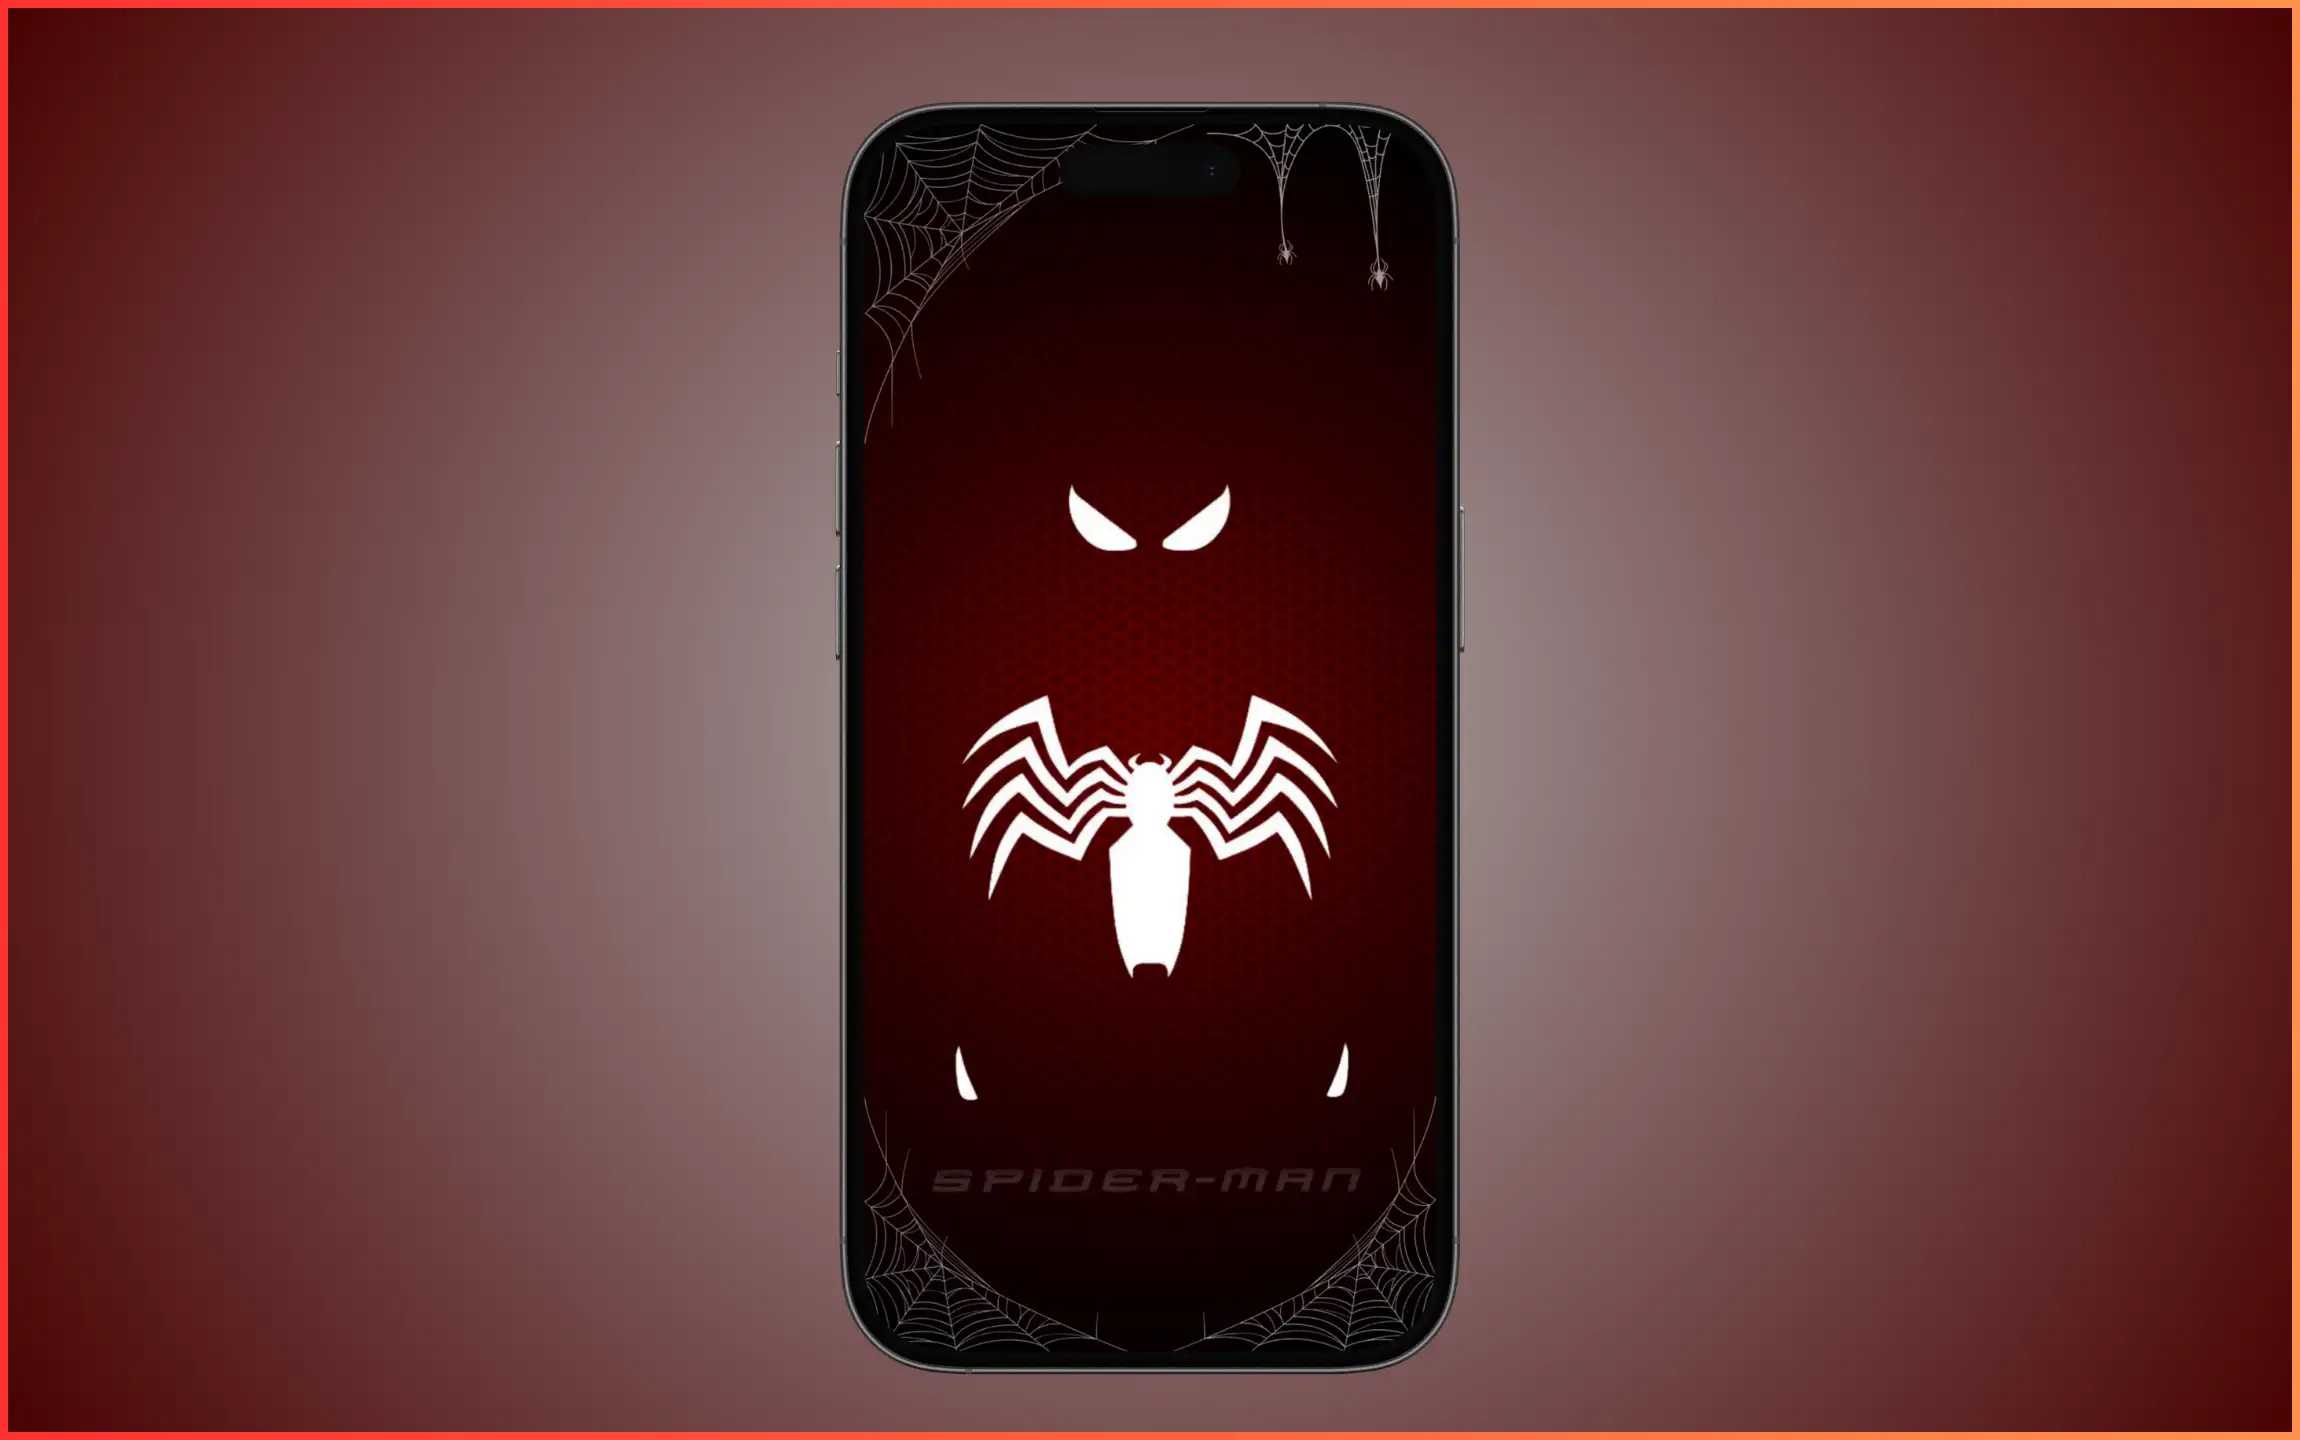 Spiderman Backgrounds Wallpaper for iPhone